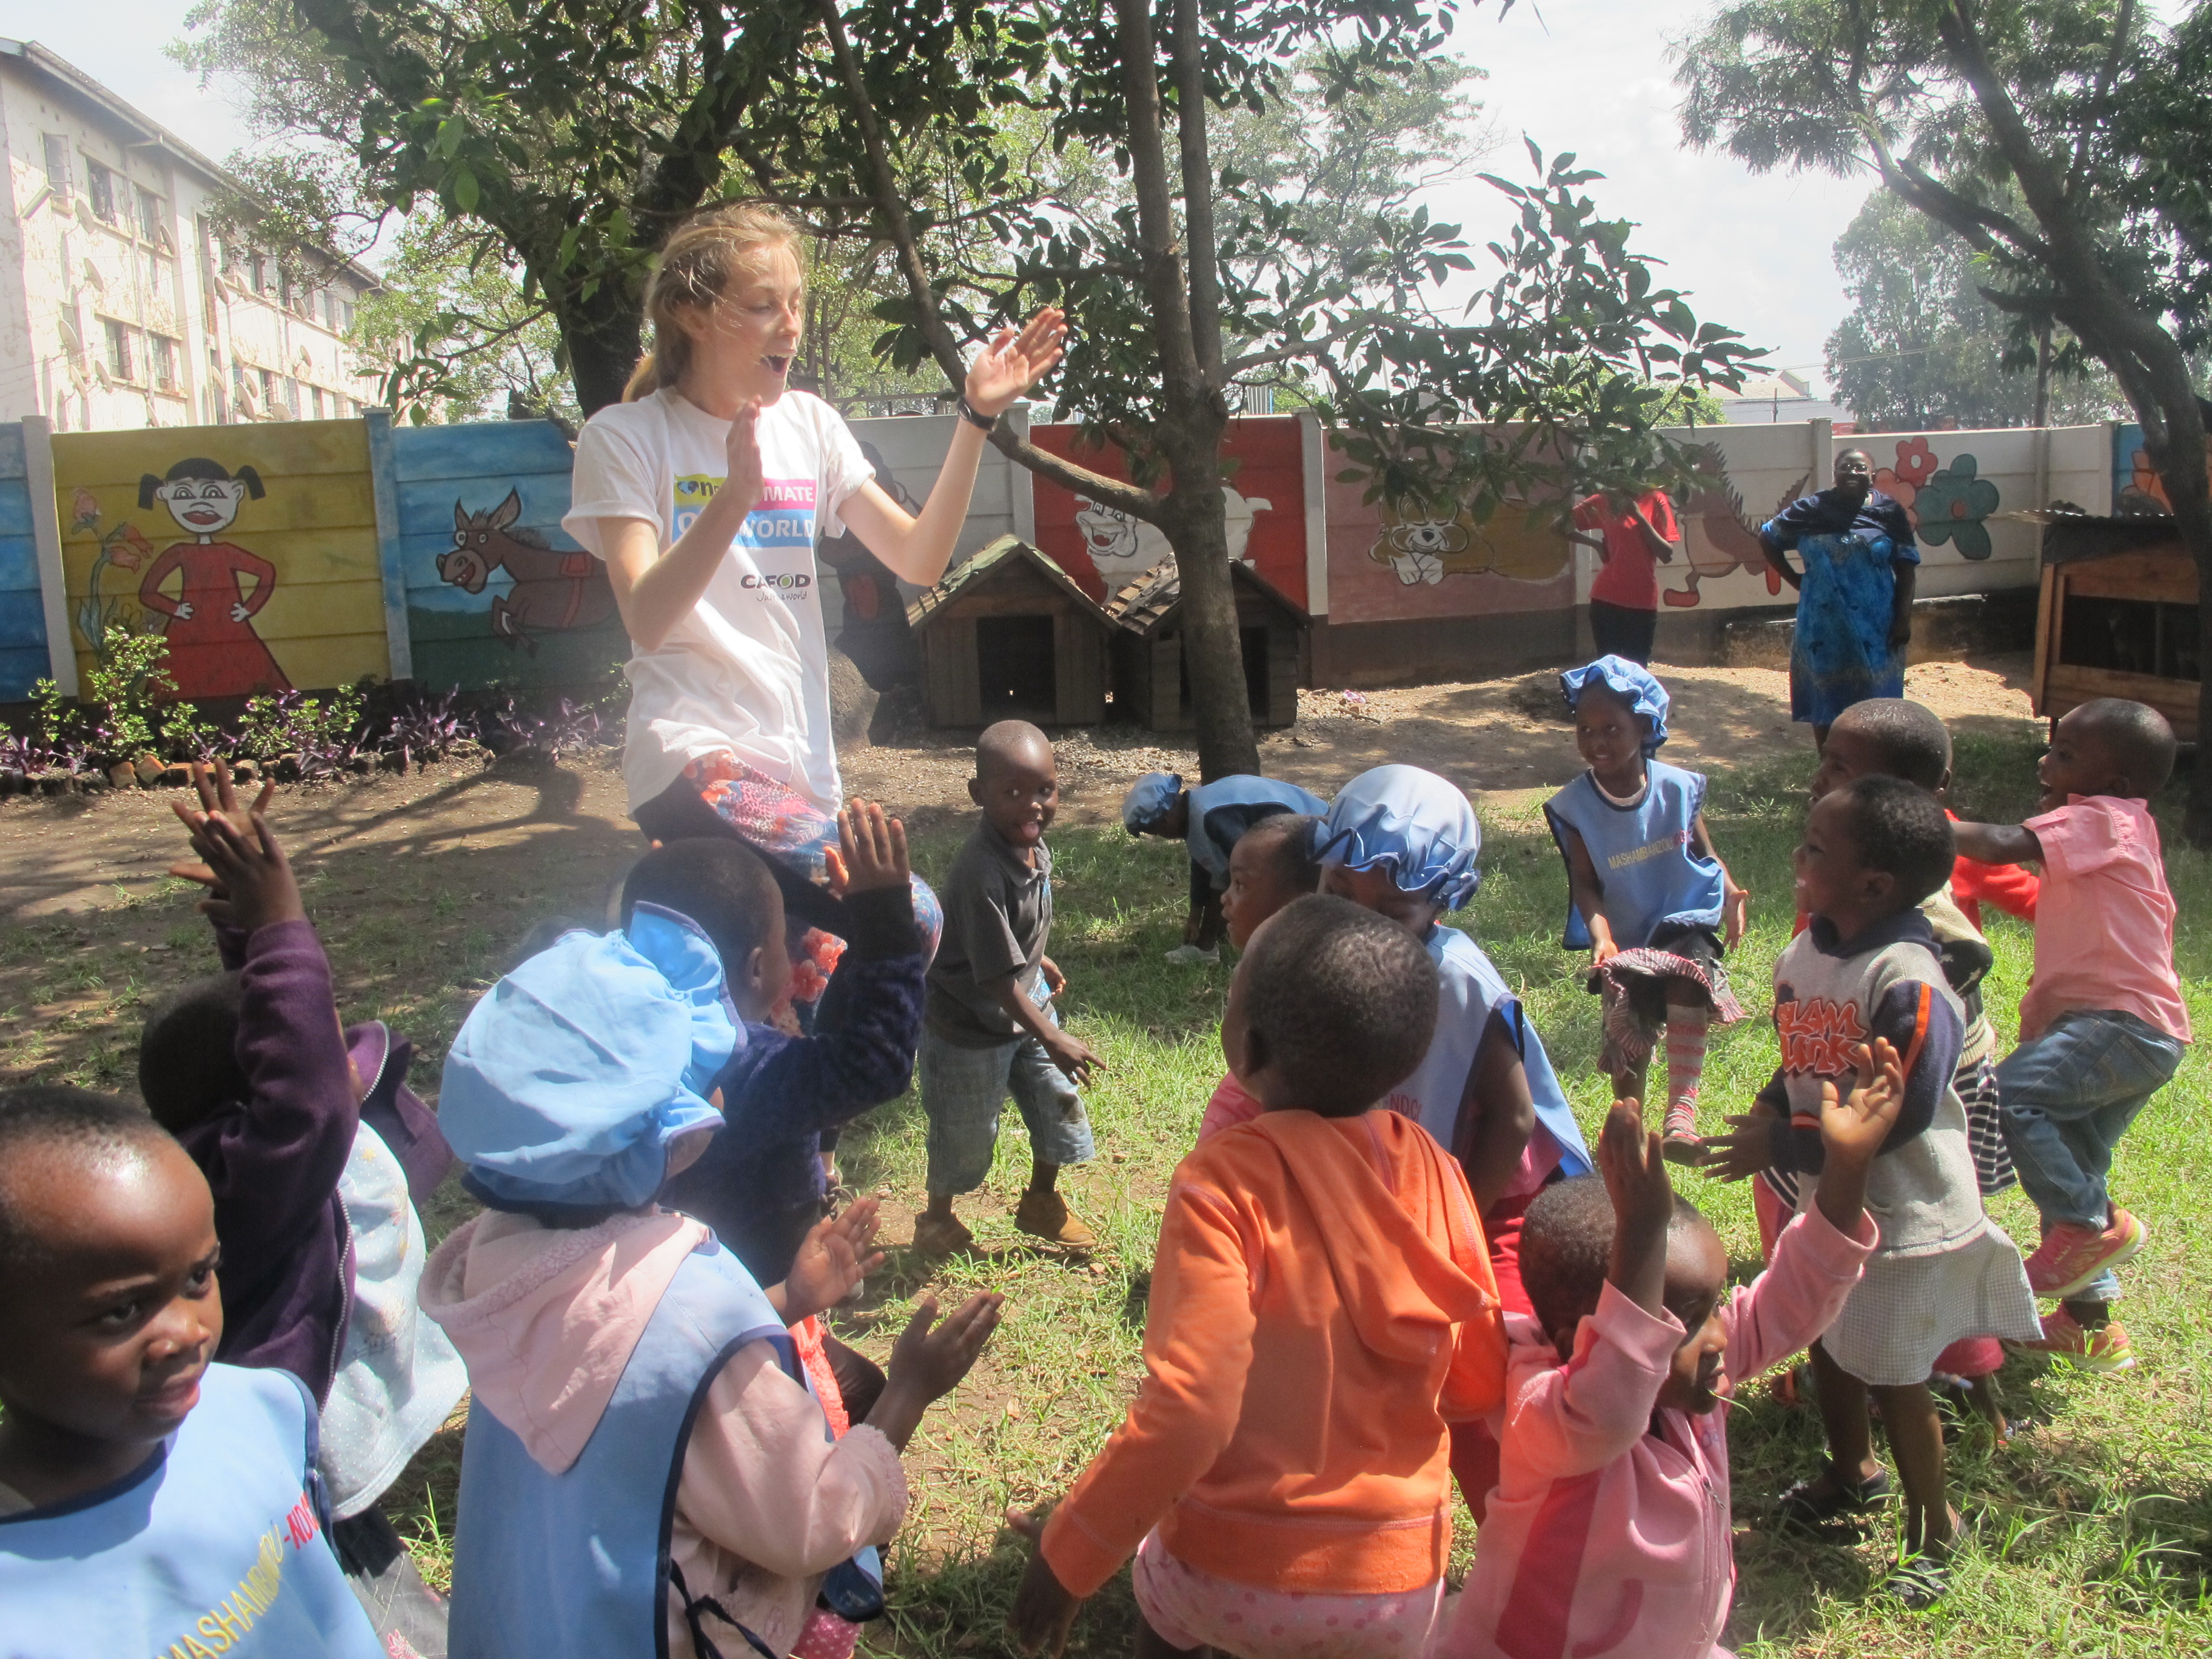 Mary leading the children in games